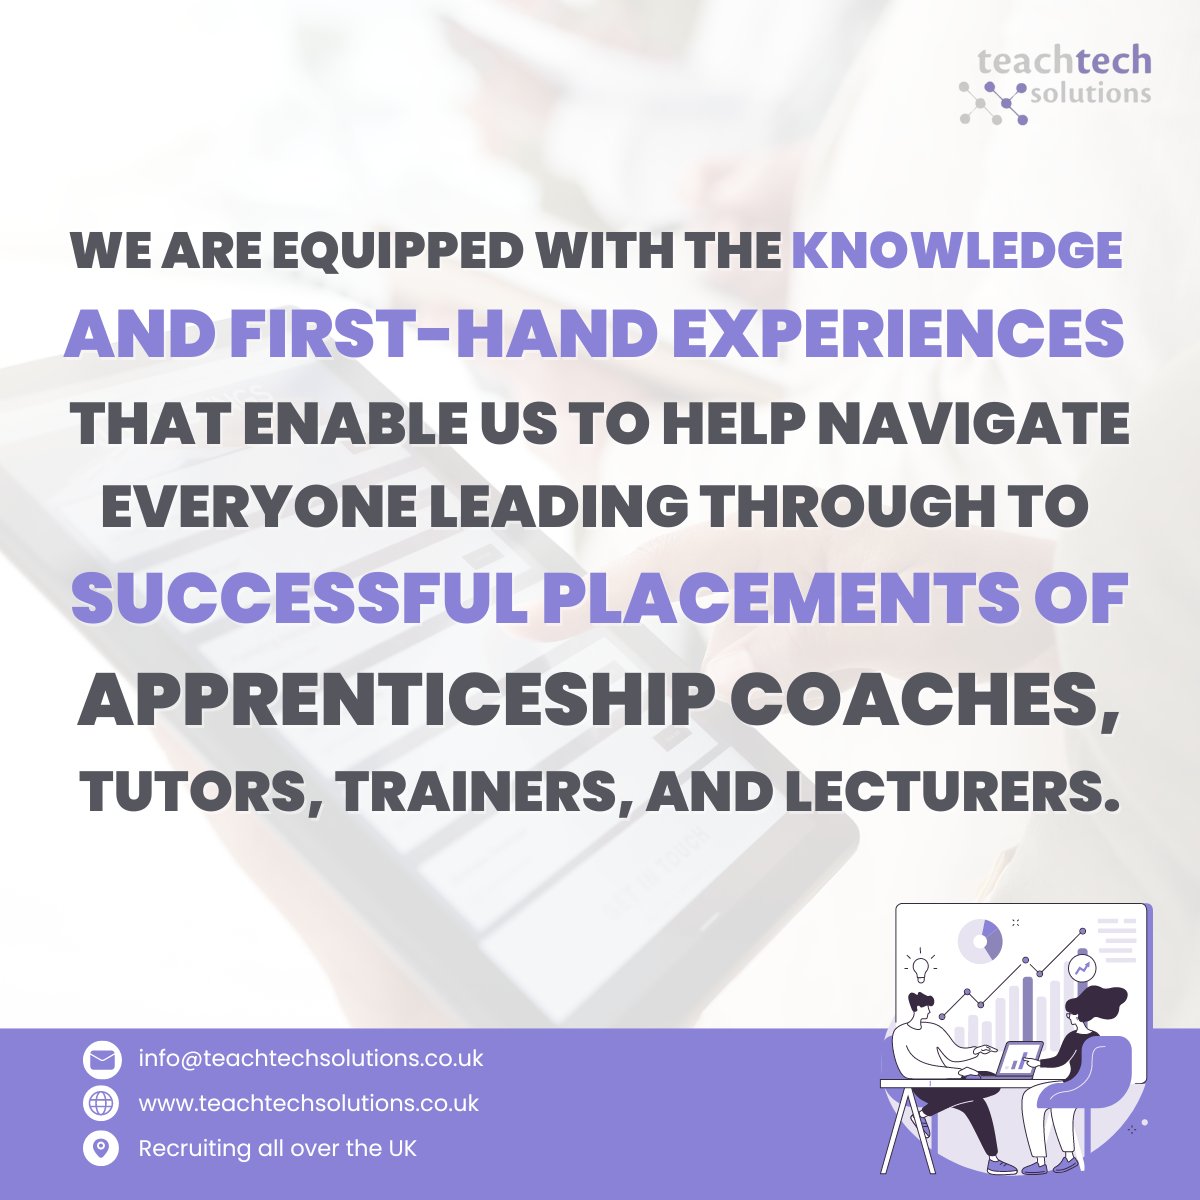 With expertise and first hand insights, we're here to guide you towards successful placements for apprenticeship coaches, tutors, trainers, and lecturers 👩‍💻

Get in touch - info@teachtechsolutions.co.uk 📧

#recruiters #apprenticeshiproles #coachingjourney #recruitmentindustry